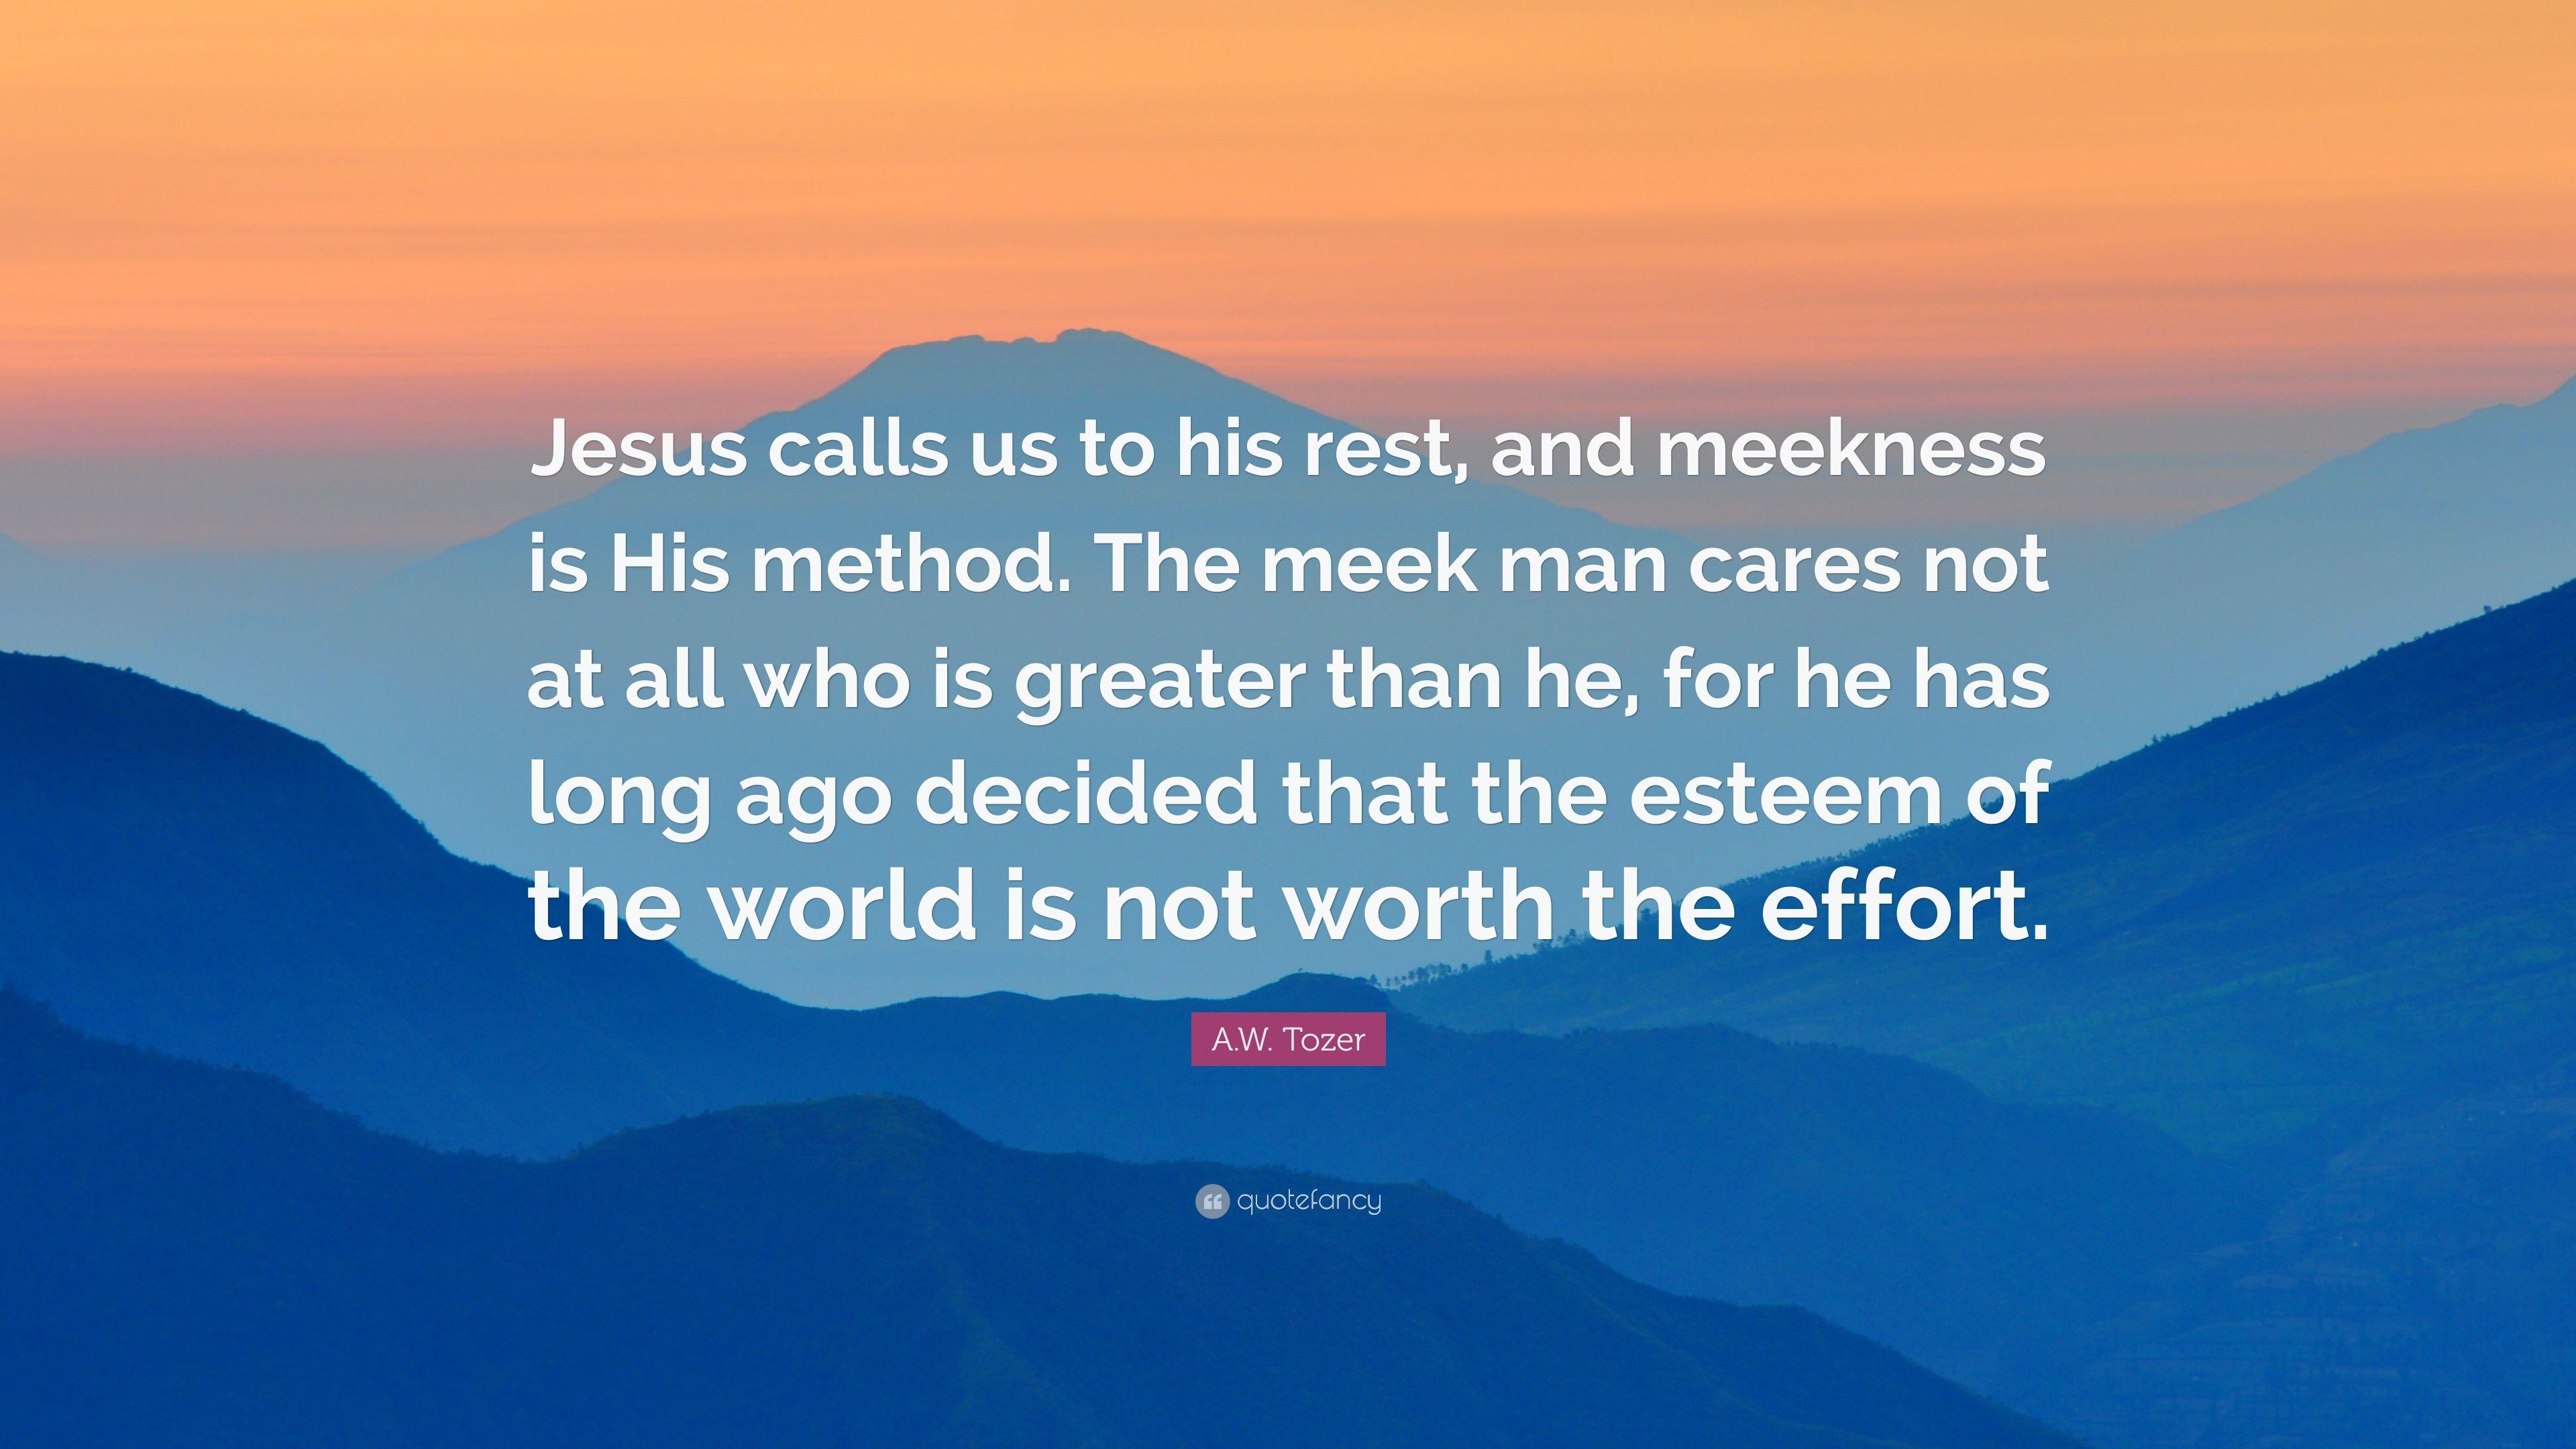 A.W. Tozer Quote: “Jesus calls us to his rest, and meekness is His